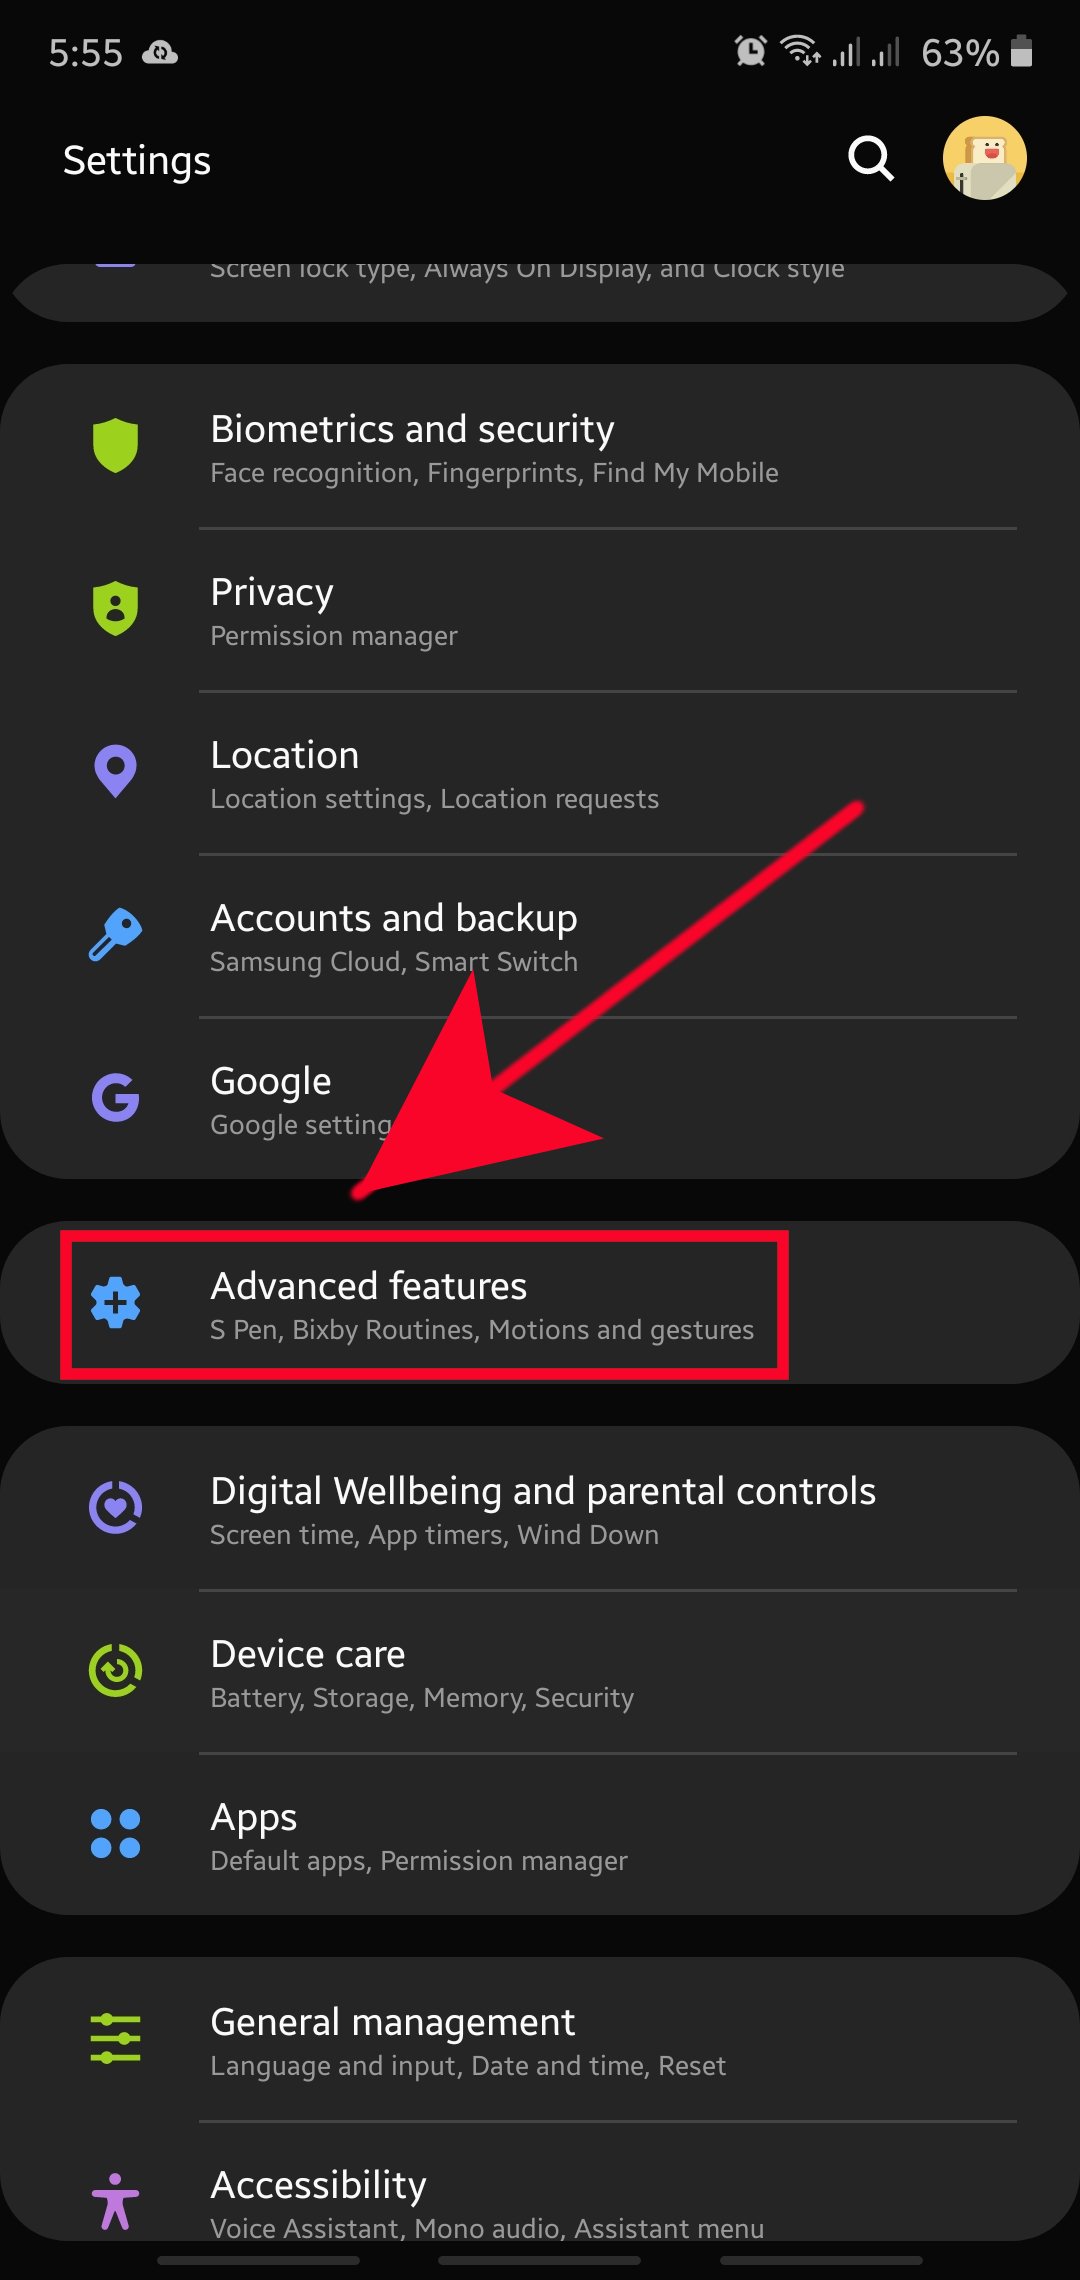 How To Fix Screen Turning Off During Calls In Samsung (Android 10)